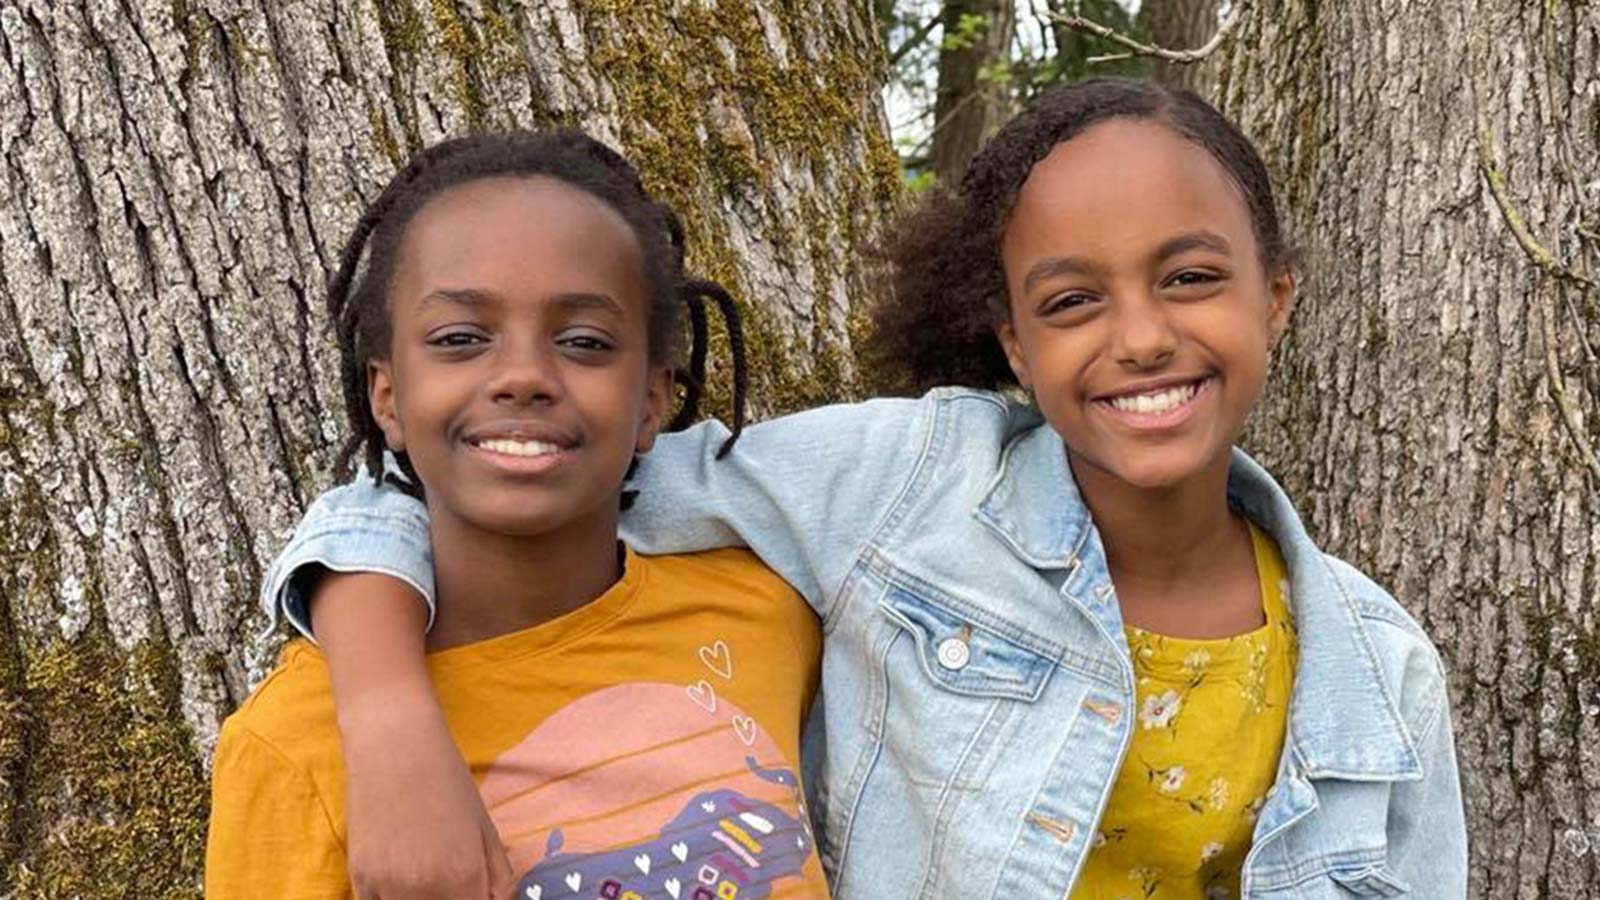 Ethiopian adoptee sisters hug and smile in front of trees